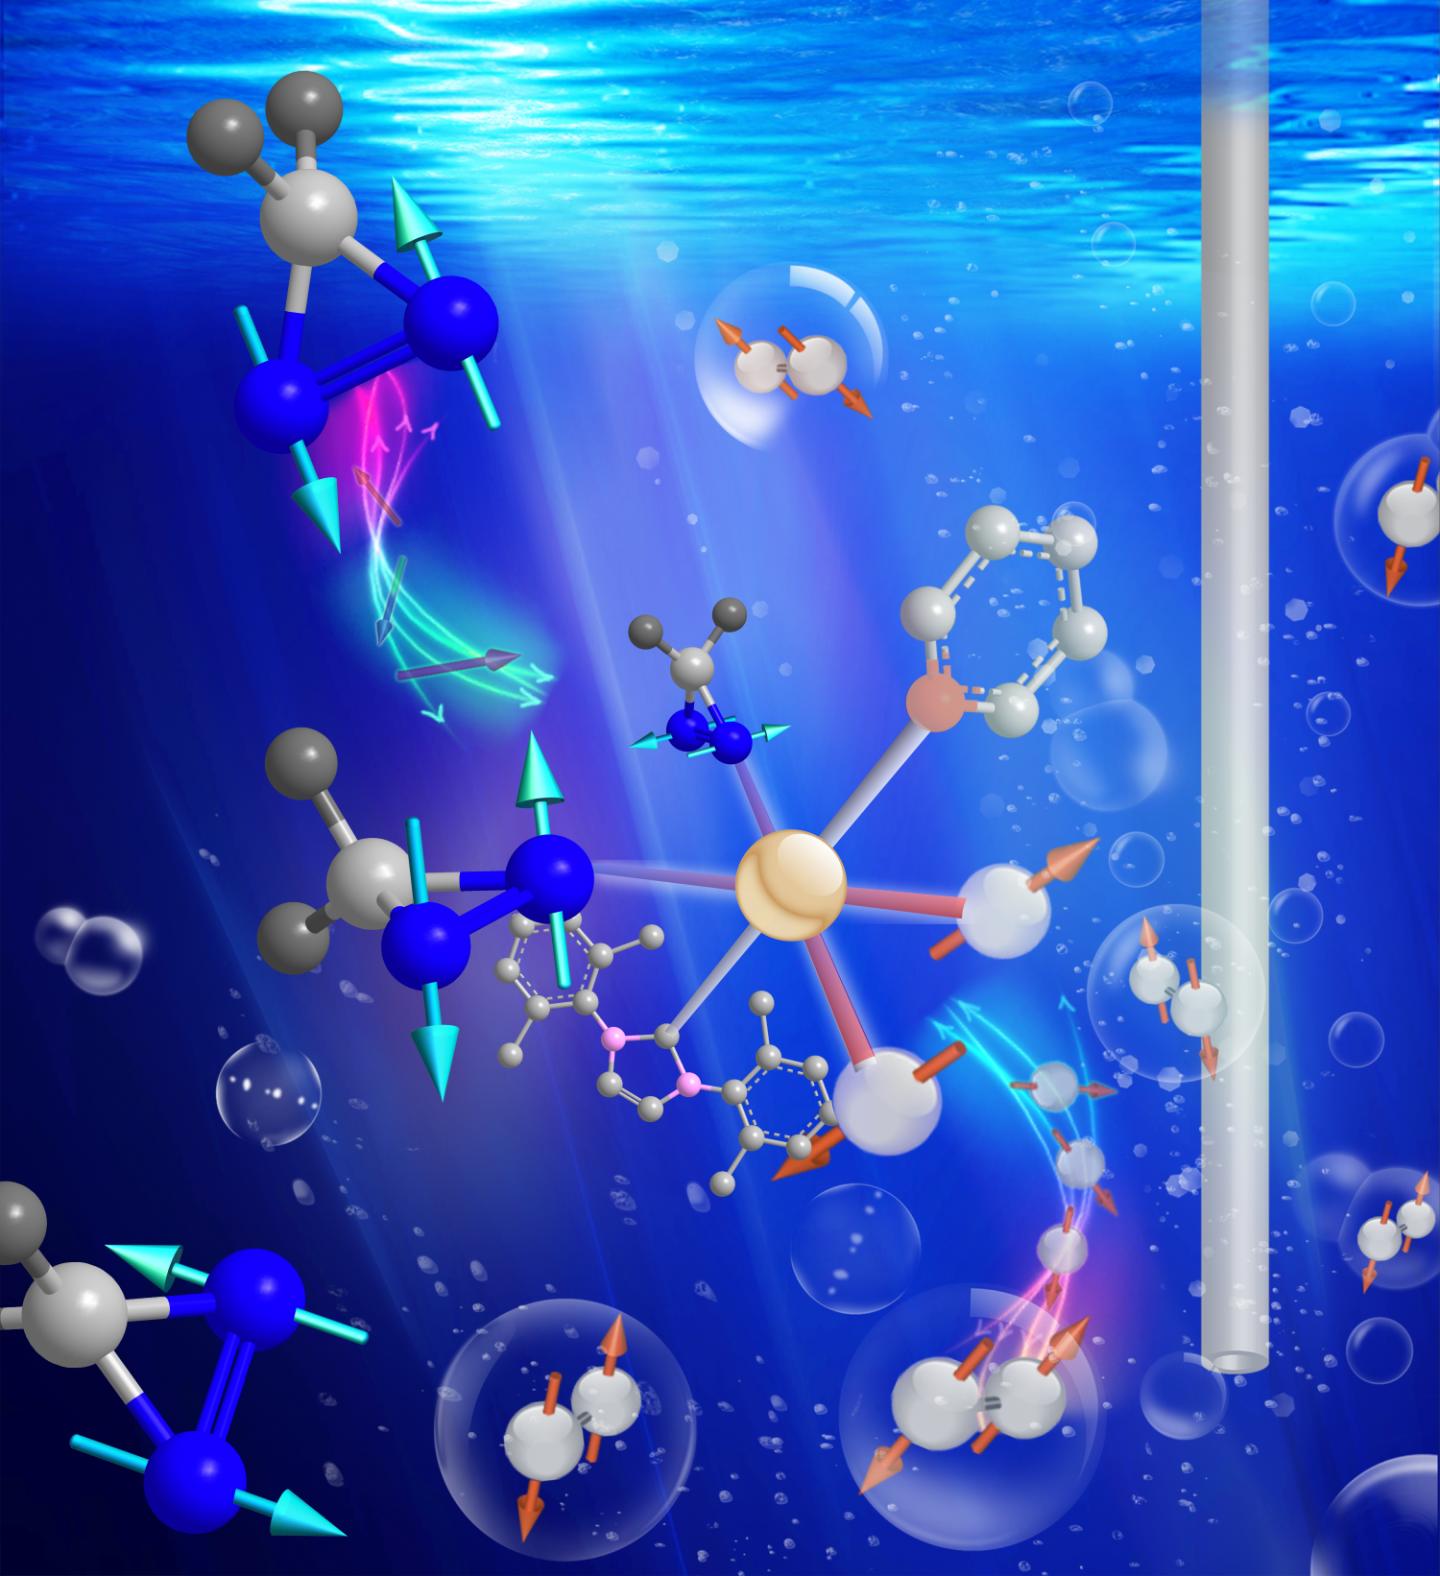 Caption: Duke scientists have discovered a new class of inexpensive and long-lived molecular tags that enhance MRI signals by 10,000-fold. To activate the tags, the researchers mix them with a newly developed catalyst (center) and a special form of hydrogen (gray), converting them into long-lived magnetic resonance 'lightbulbs' that might be used to track disease metabolism in real time. Credit: Thomas Theis, Duke University